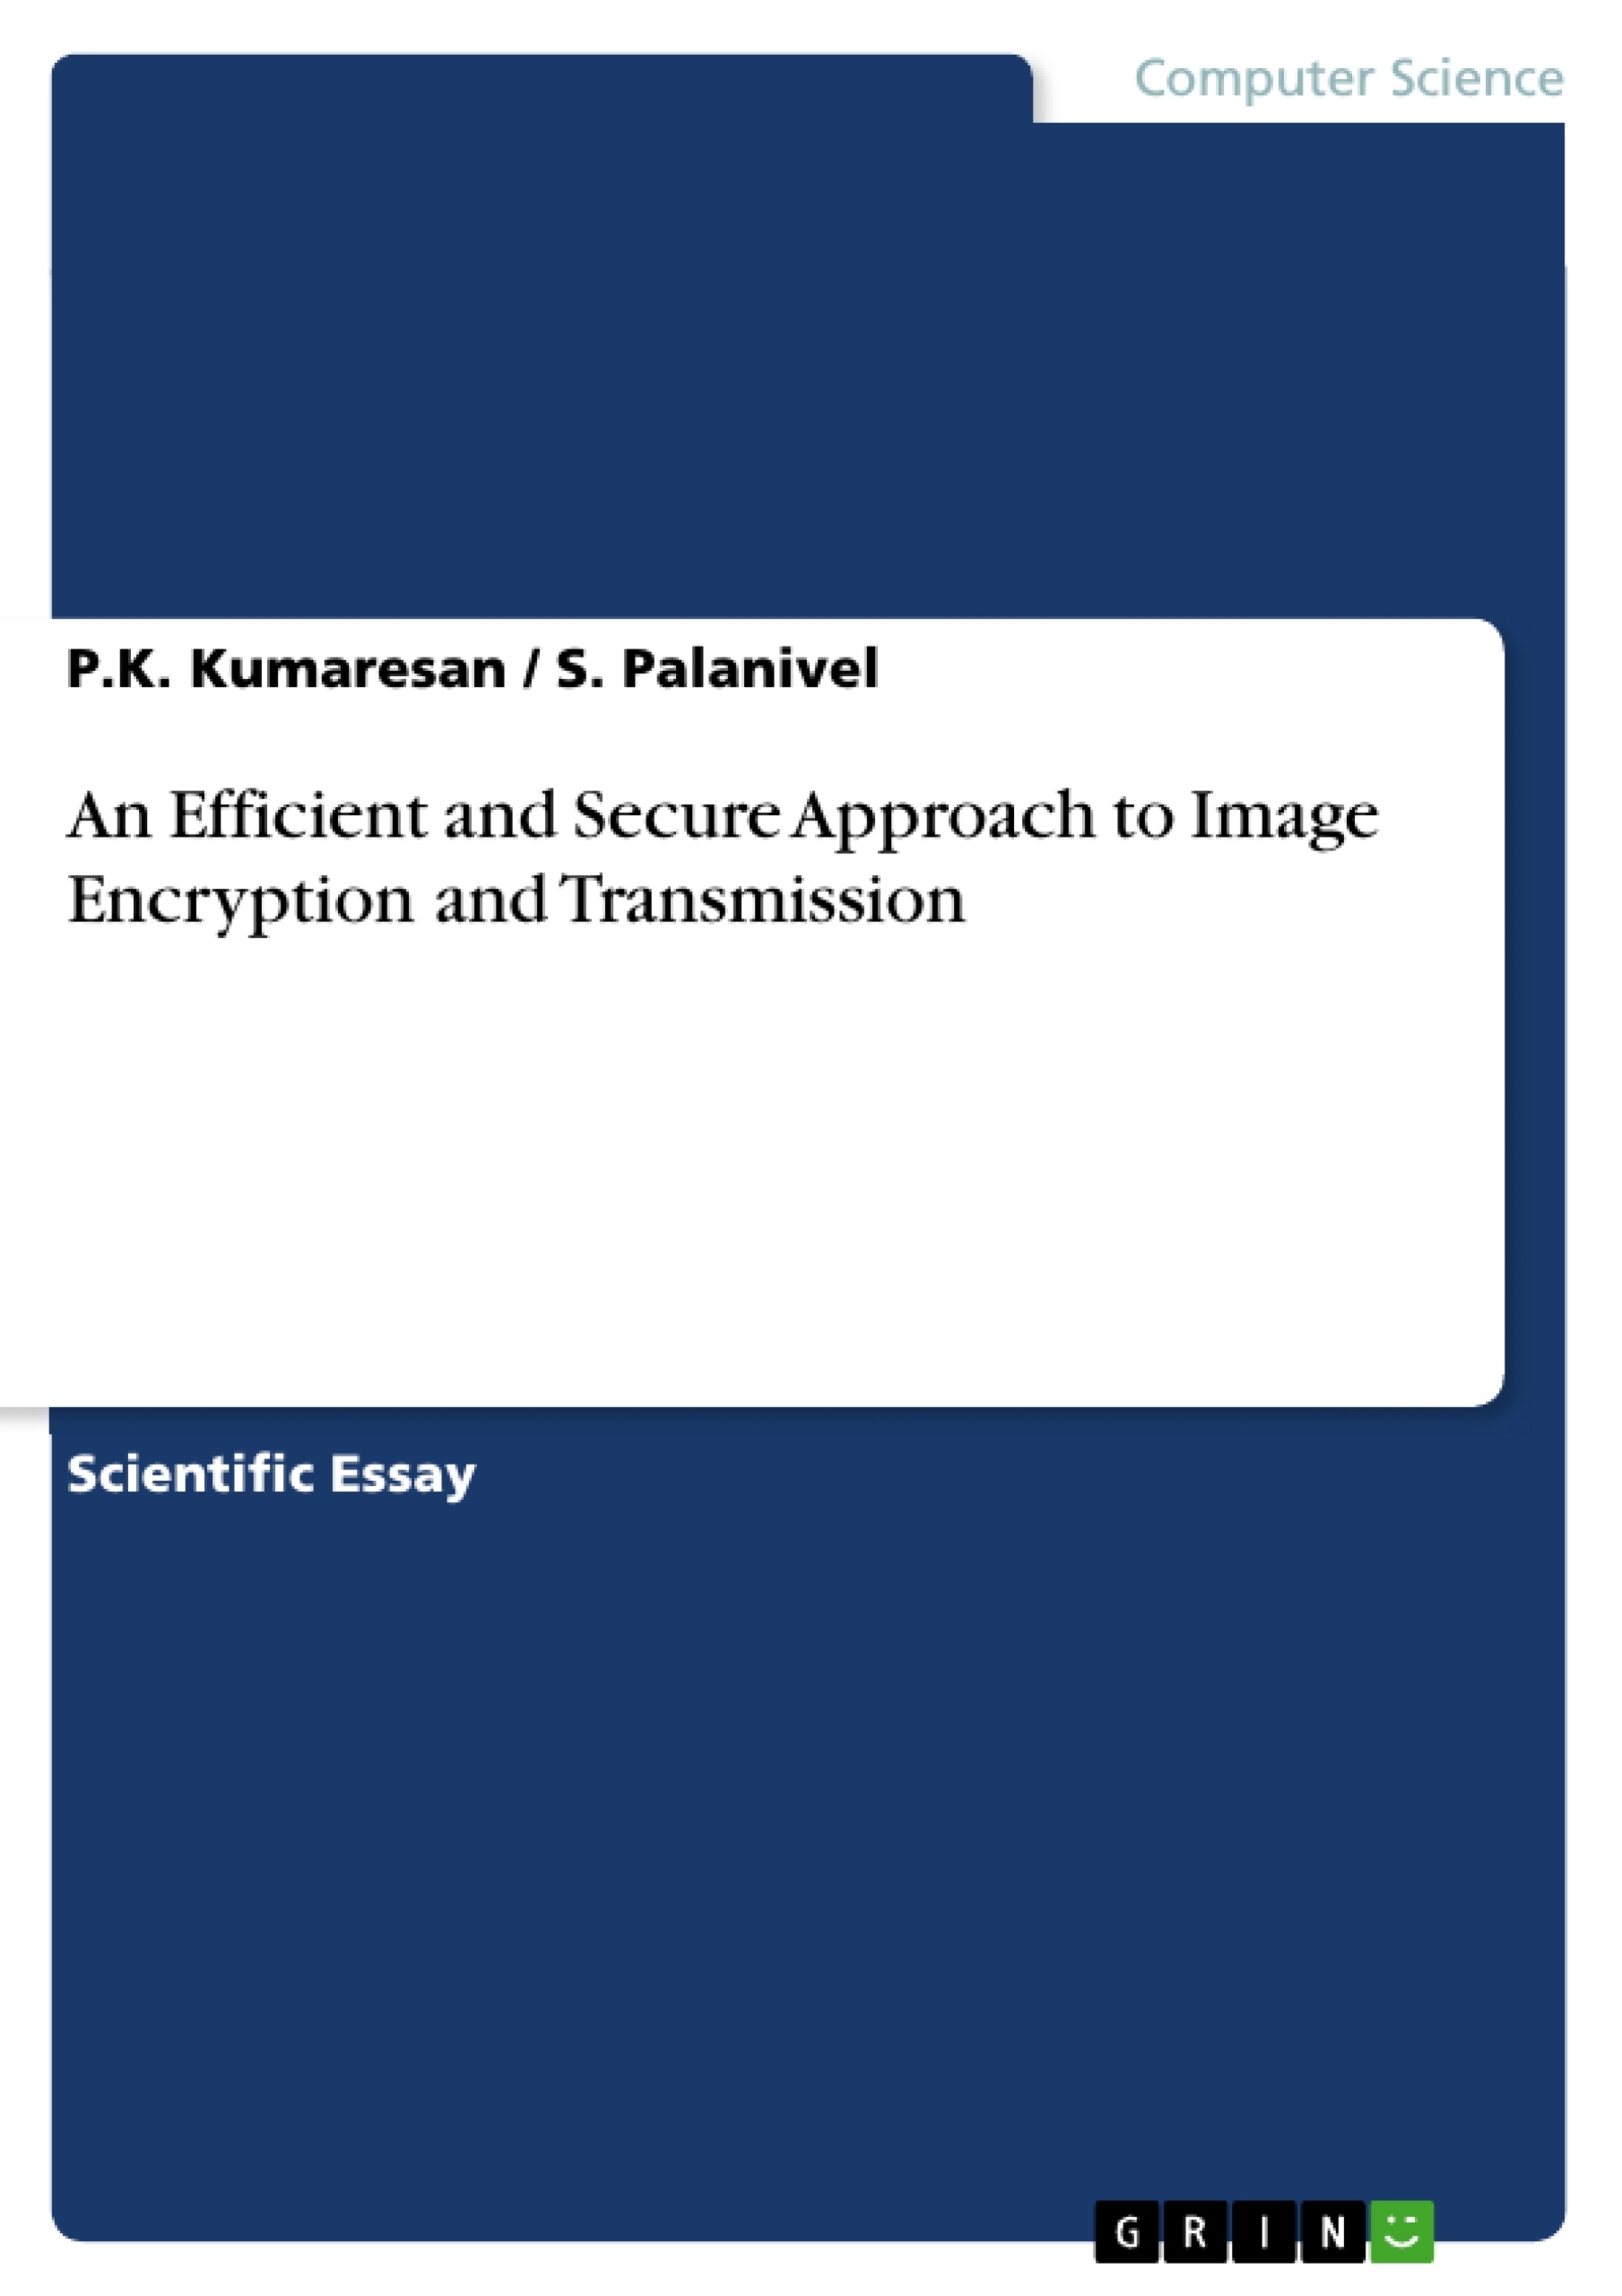 Titre: An Efficient and Secure Approach to Image Encryption and Transmission